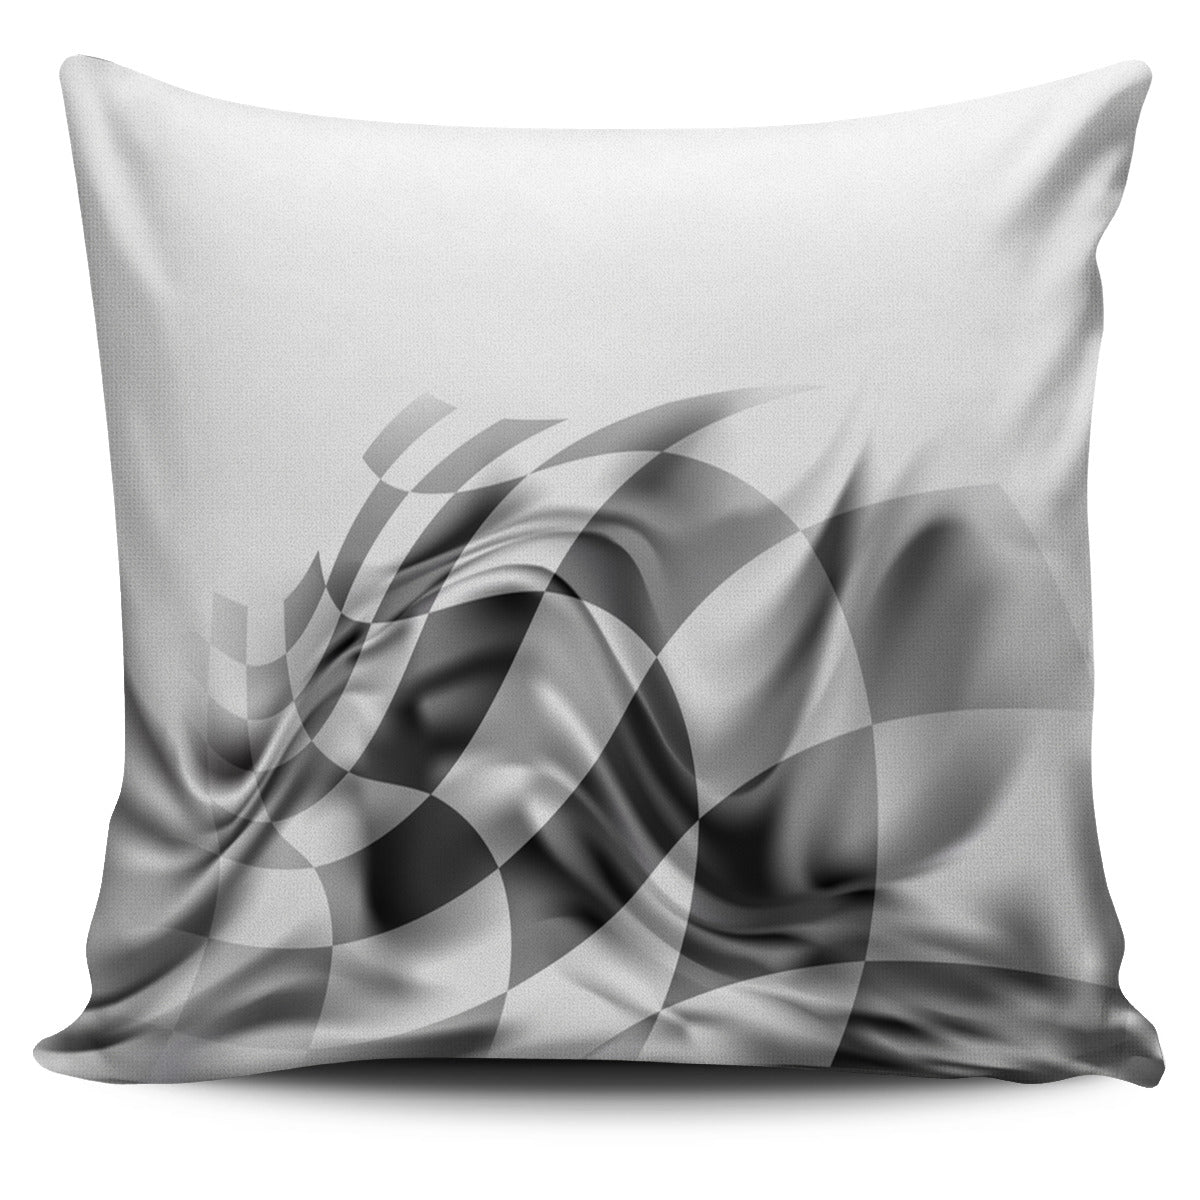 Racing Pillow Cover V12